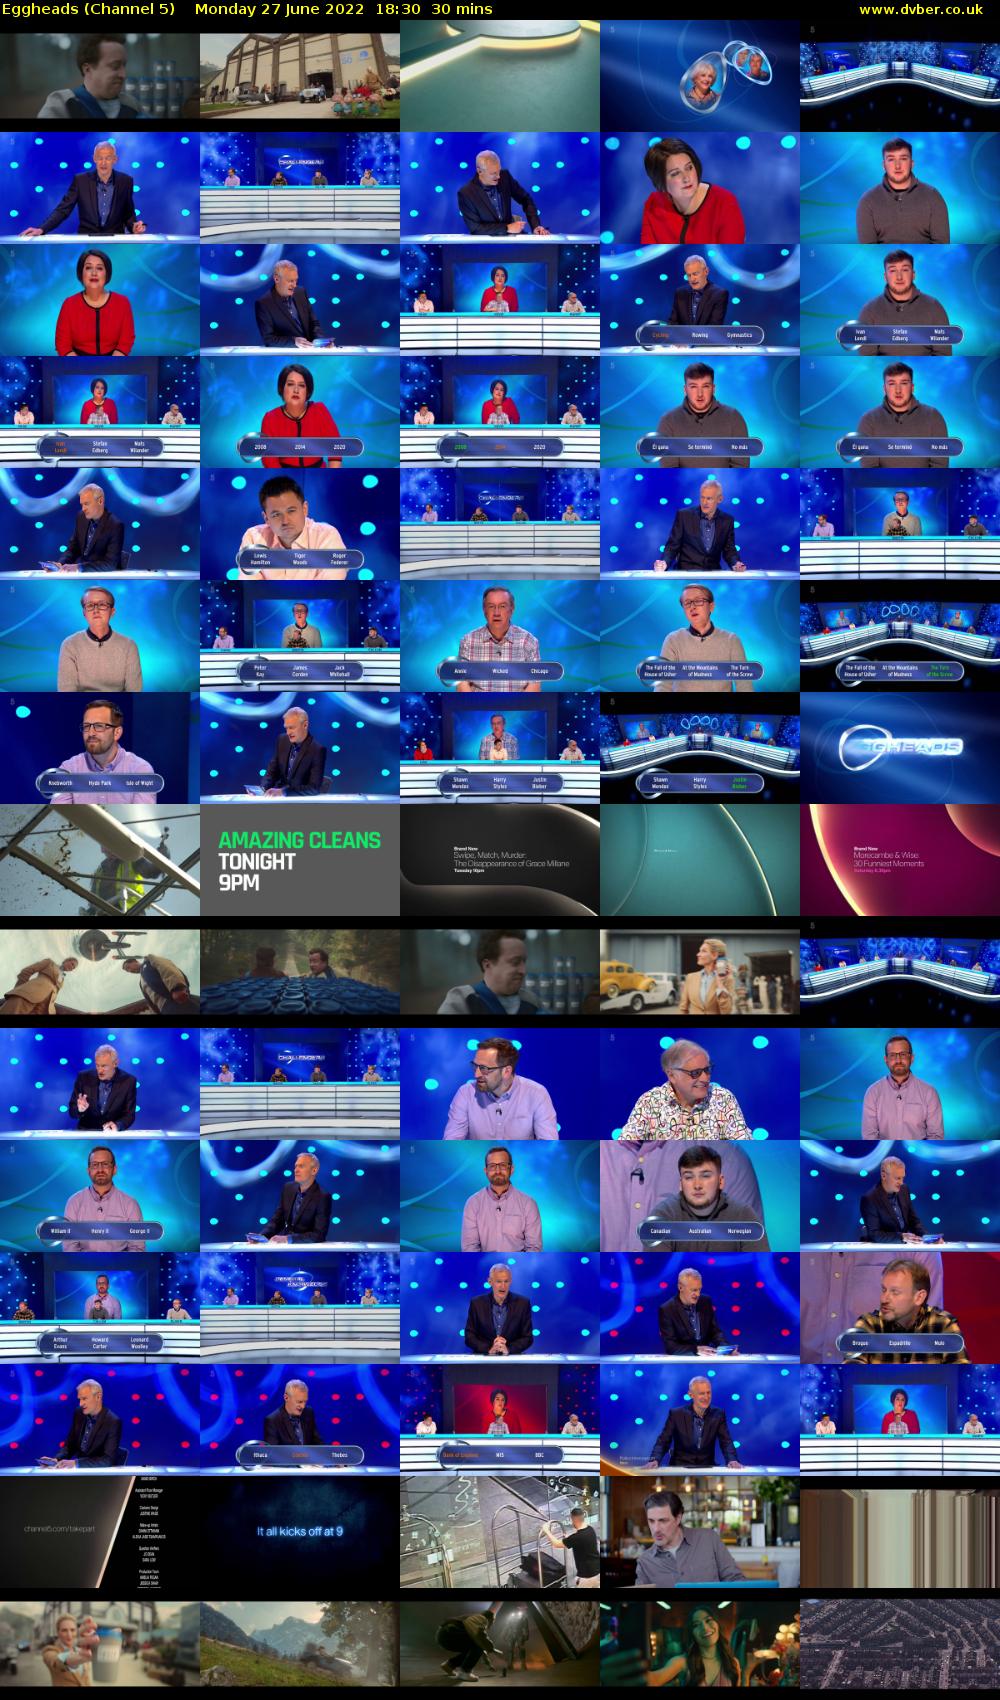 Eggheads (Channel 5) Monday 27 June 2022 18:30 - 19:00